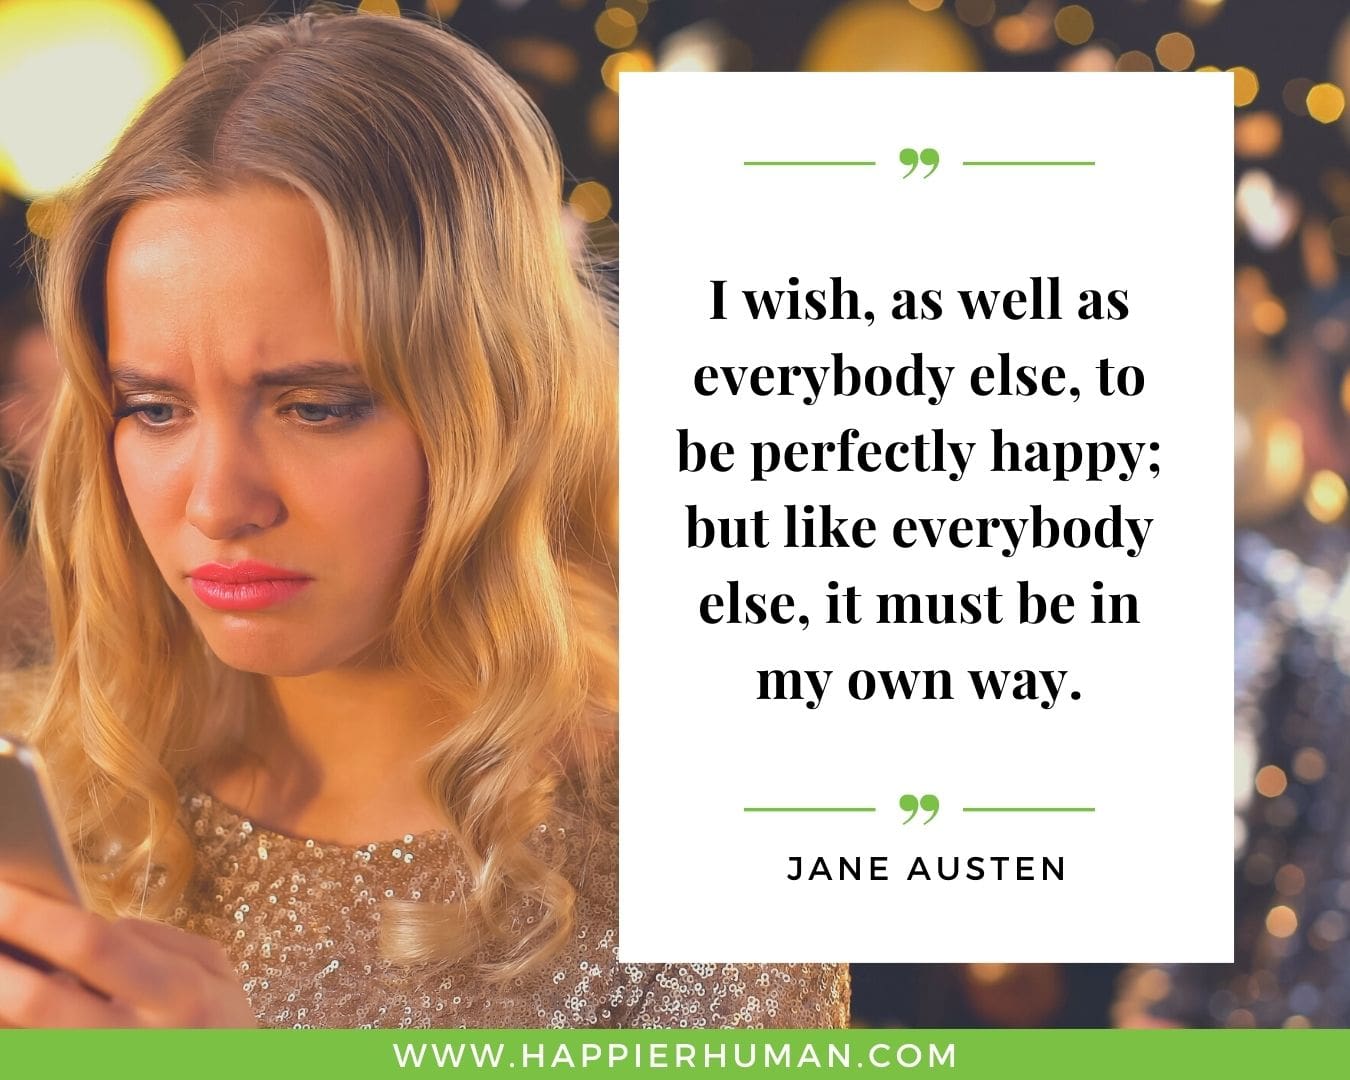 Introvert Quotes - “I wish, as well as everybody else, to be perfectly happy; but like everybody else, it must be in my own way.” – Jane Austen